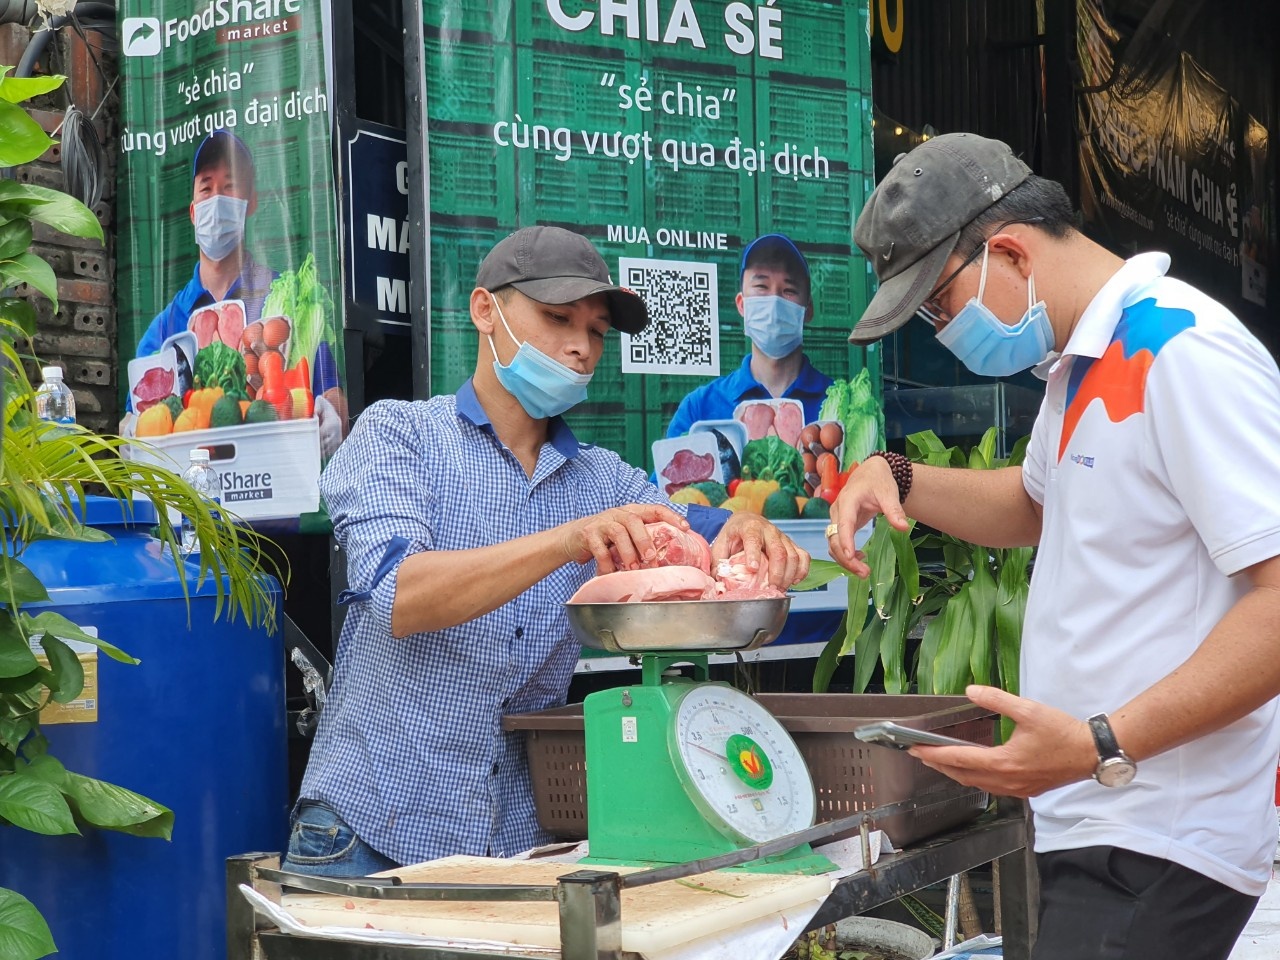 Ho Chi Minh City allows certain businesses to open until 9pm